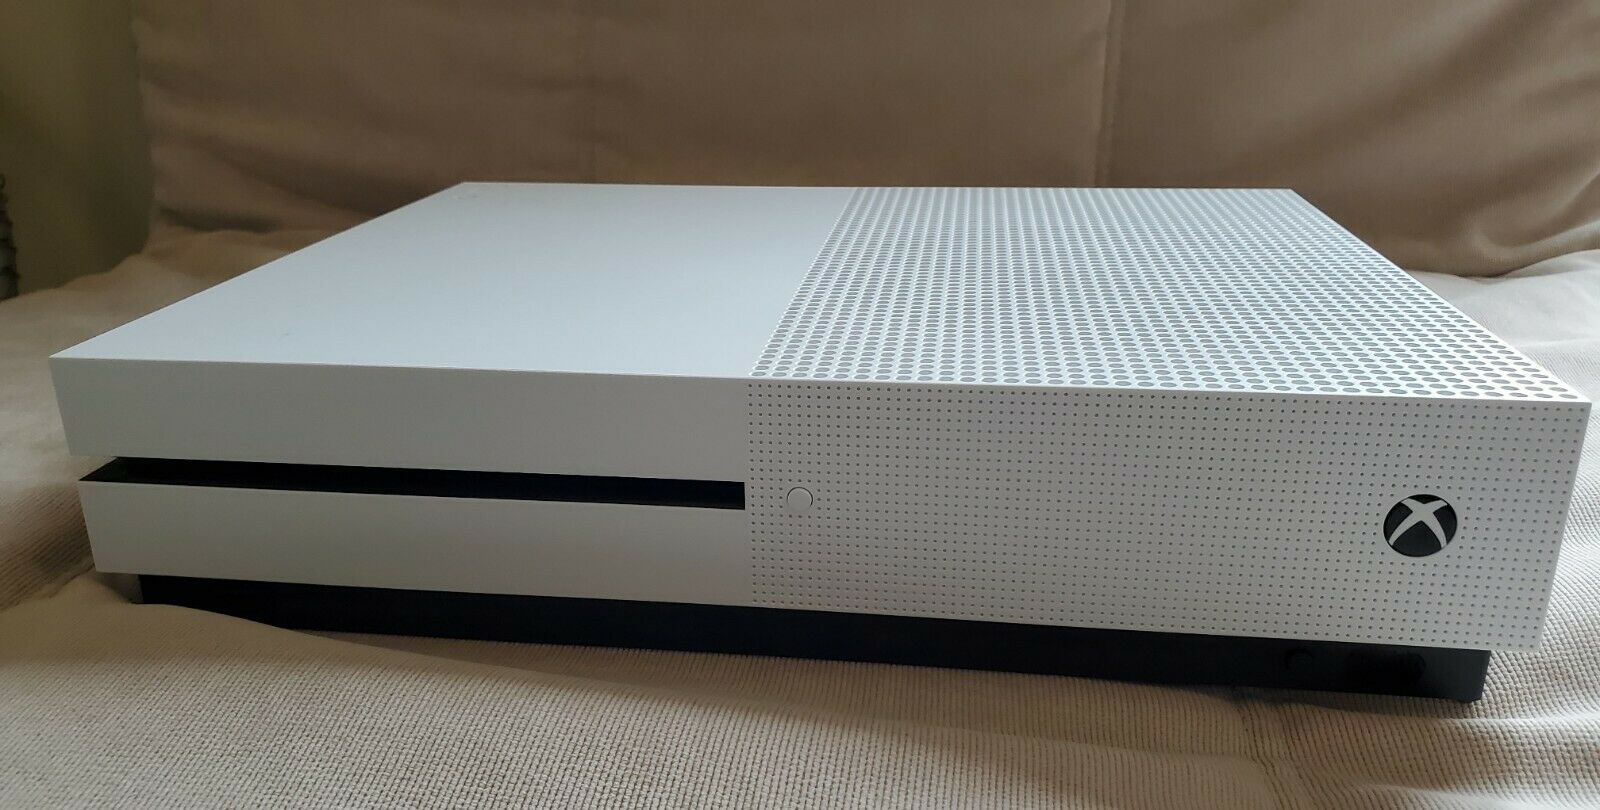 Microsoft Xbox One S 500GB White Console (with one controller ...
